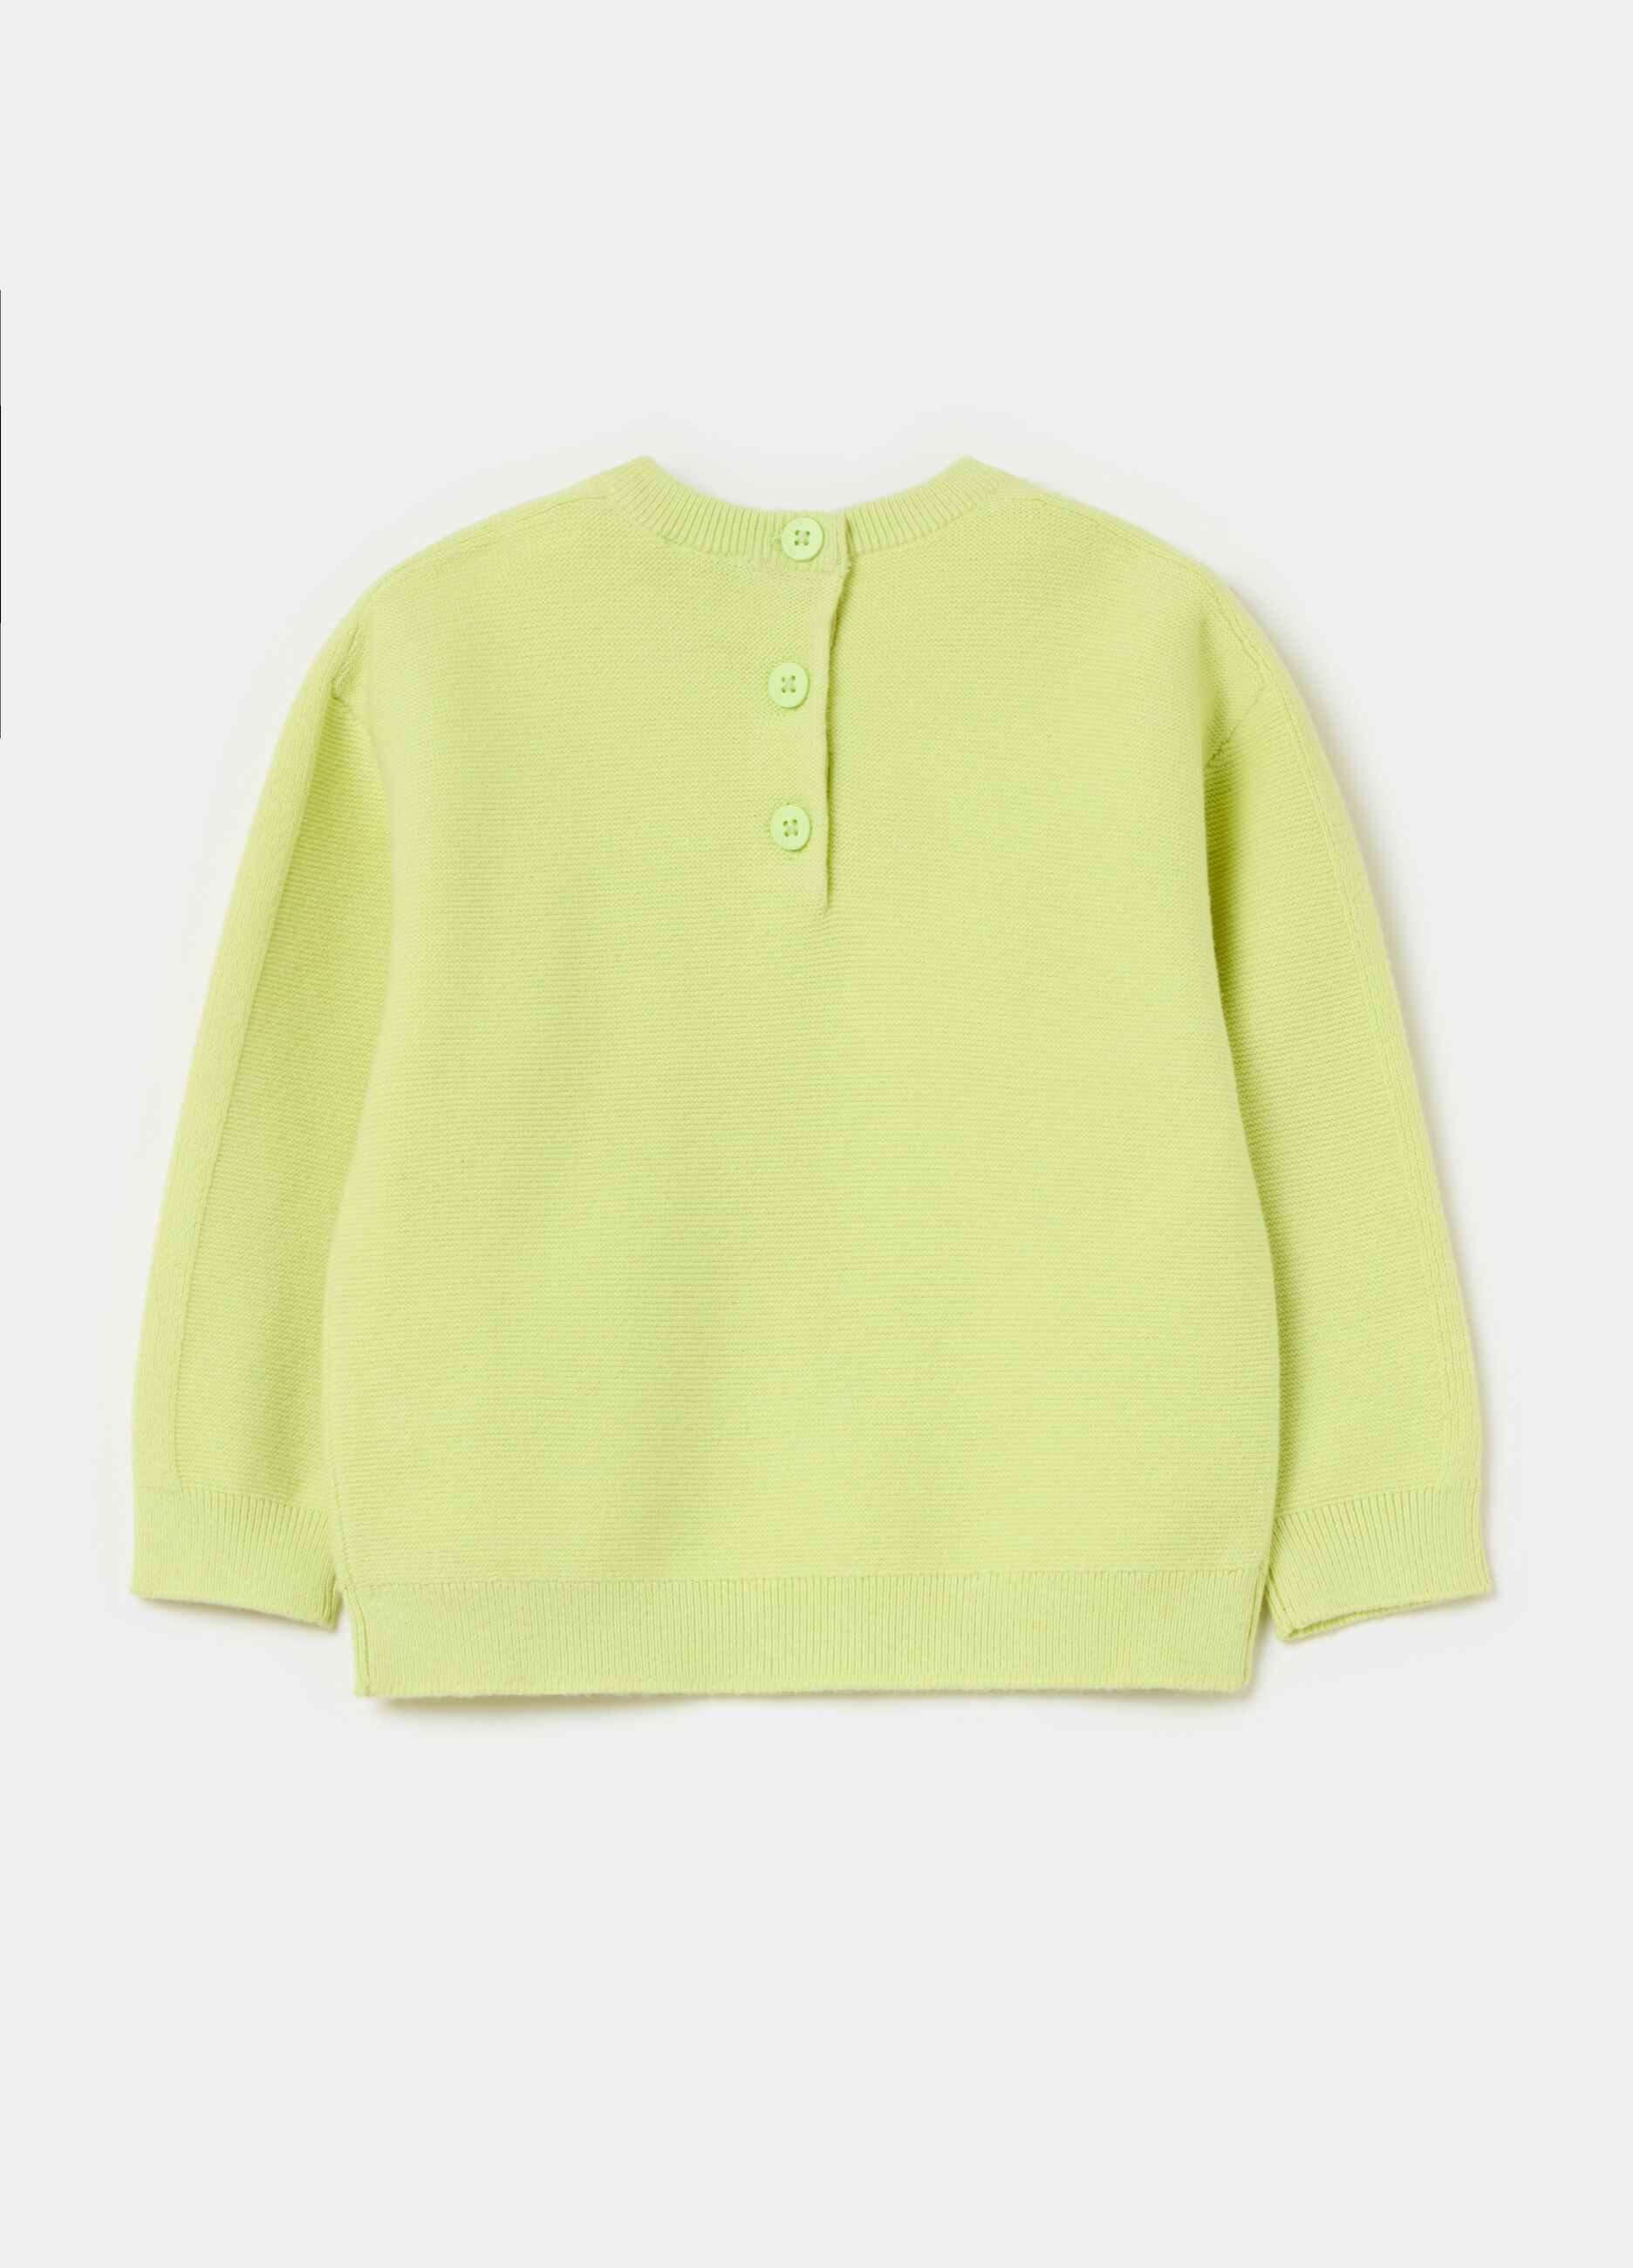 Cotton pullover with pocket